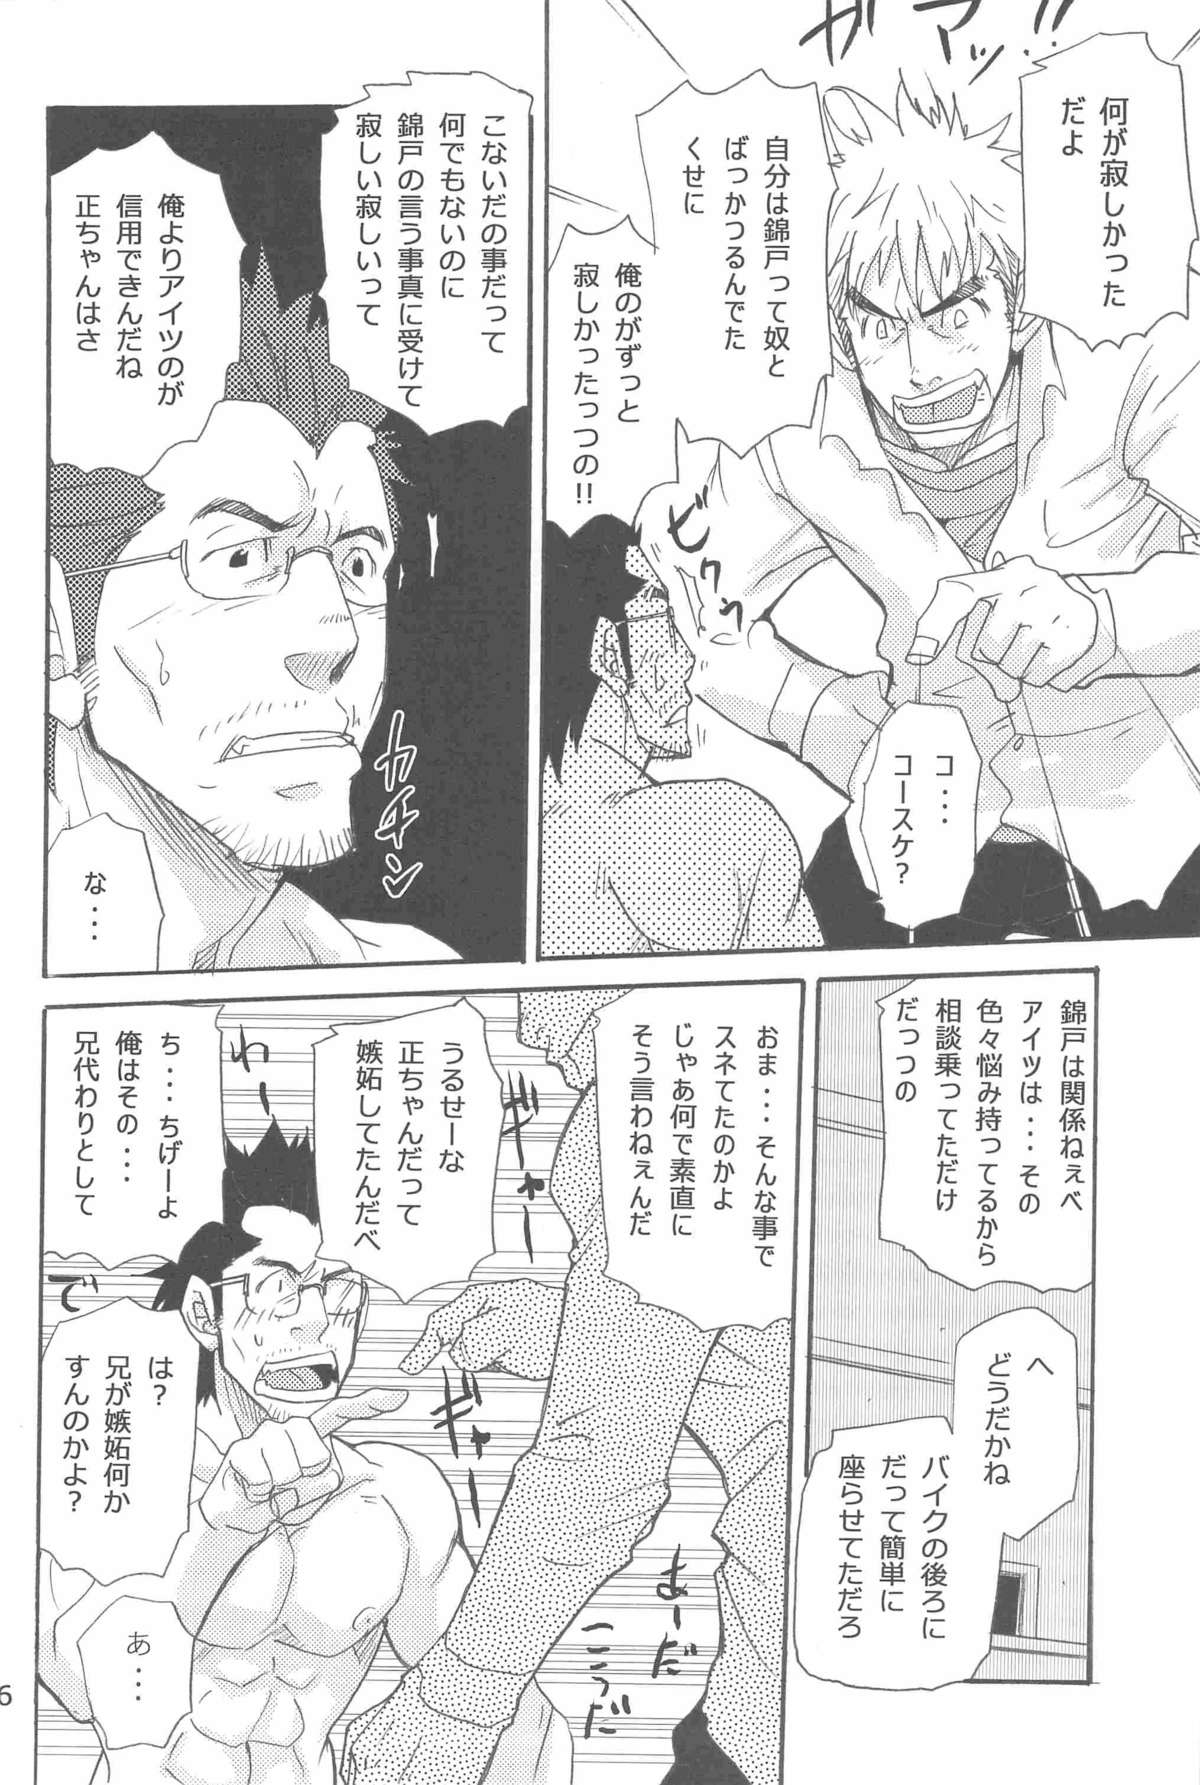 [MATSU Takeshi] More and More of You 5 page 8 full